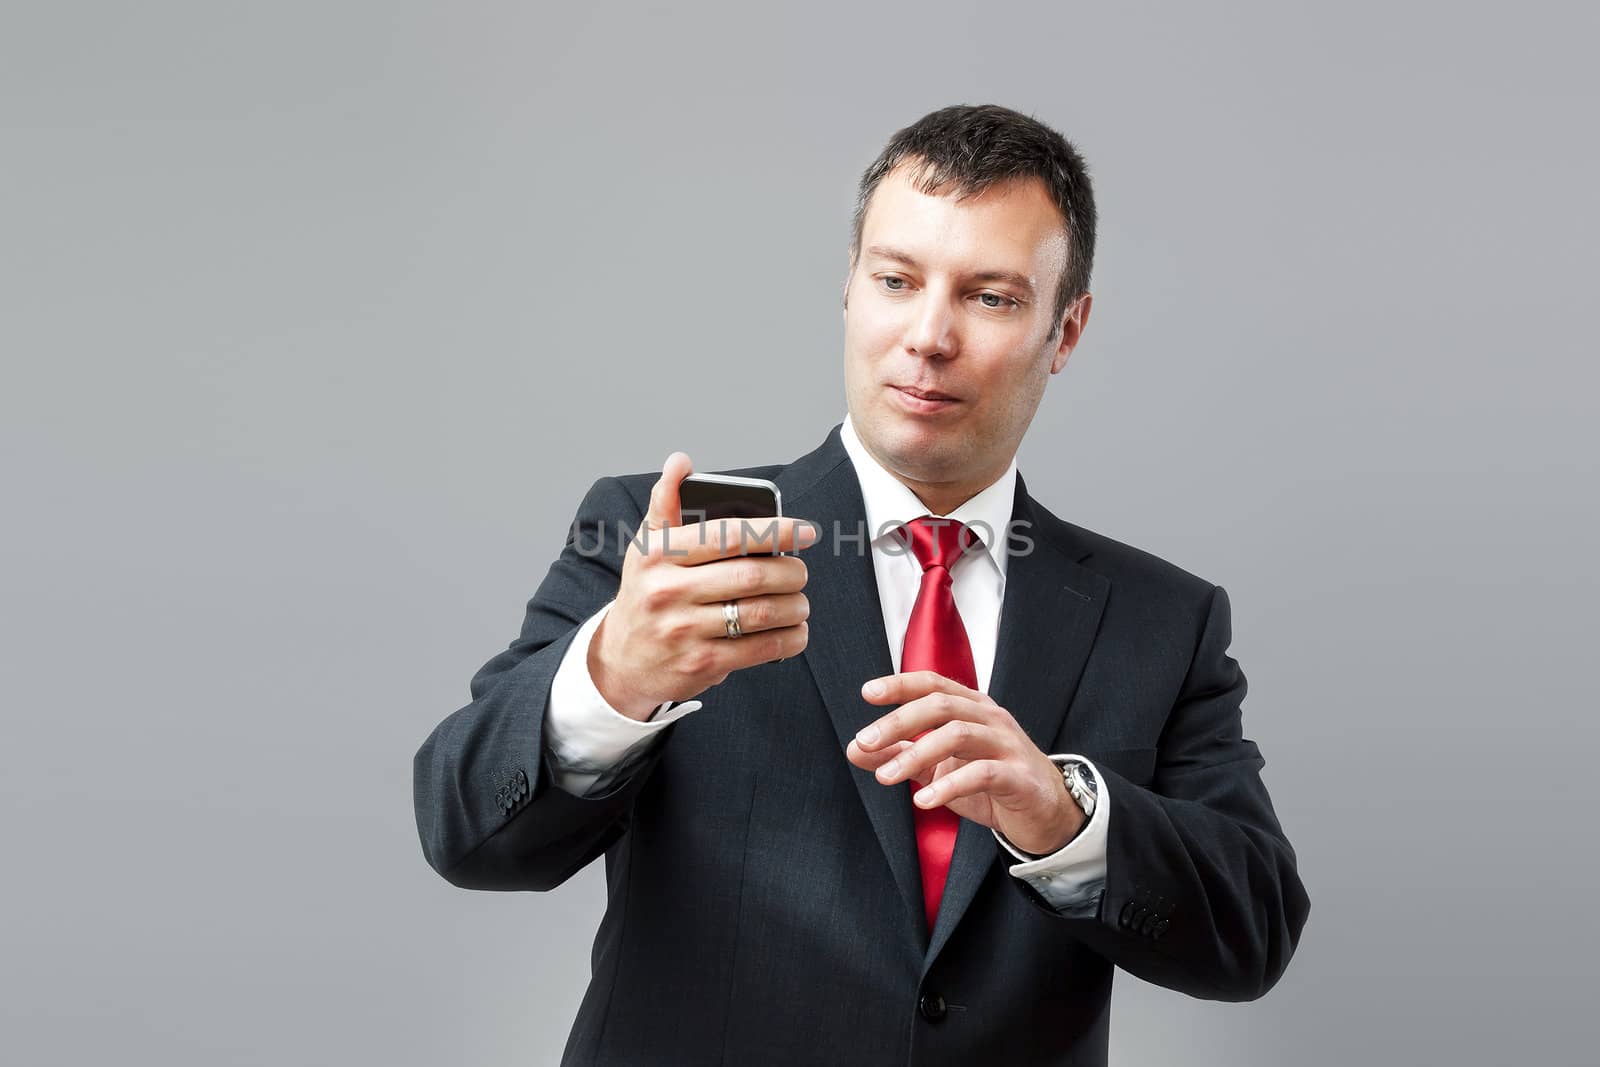 An image of a business man with his mobile phone